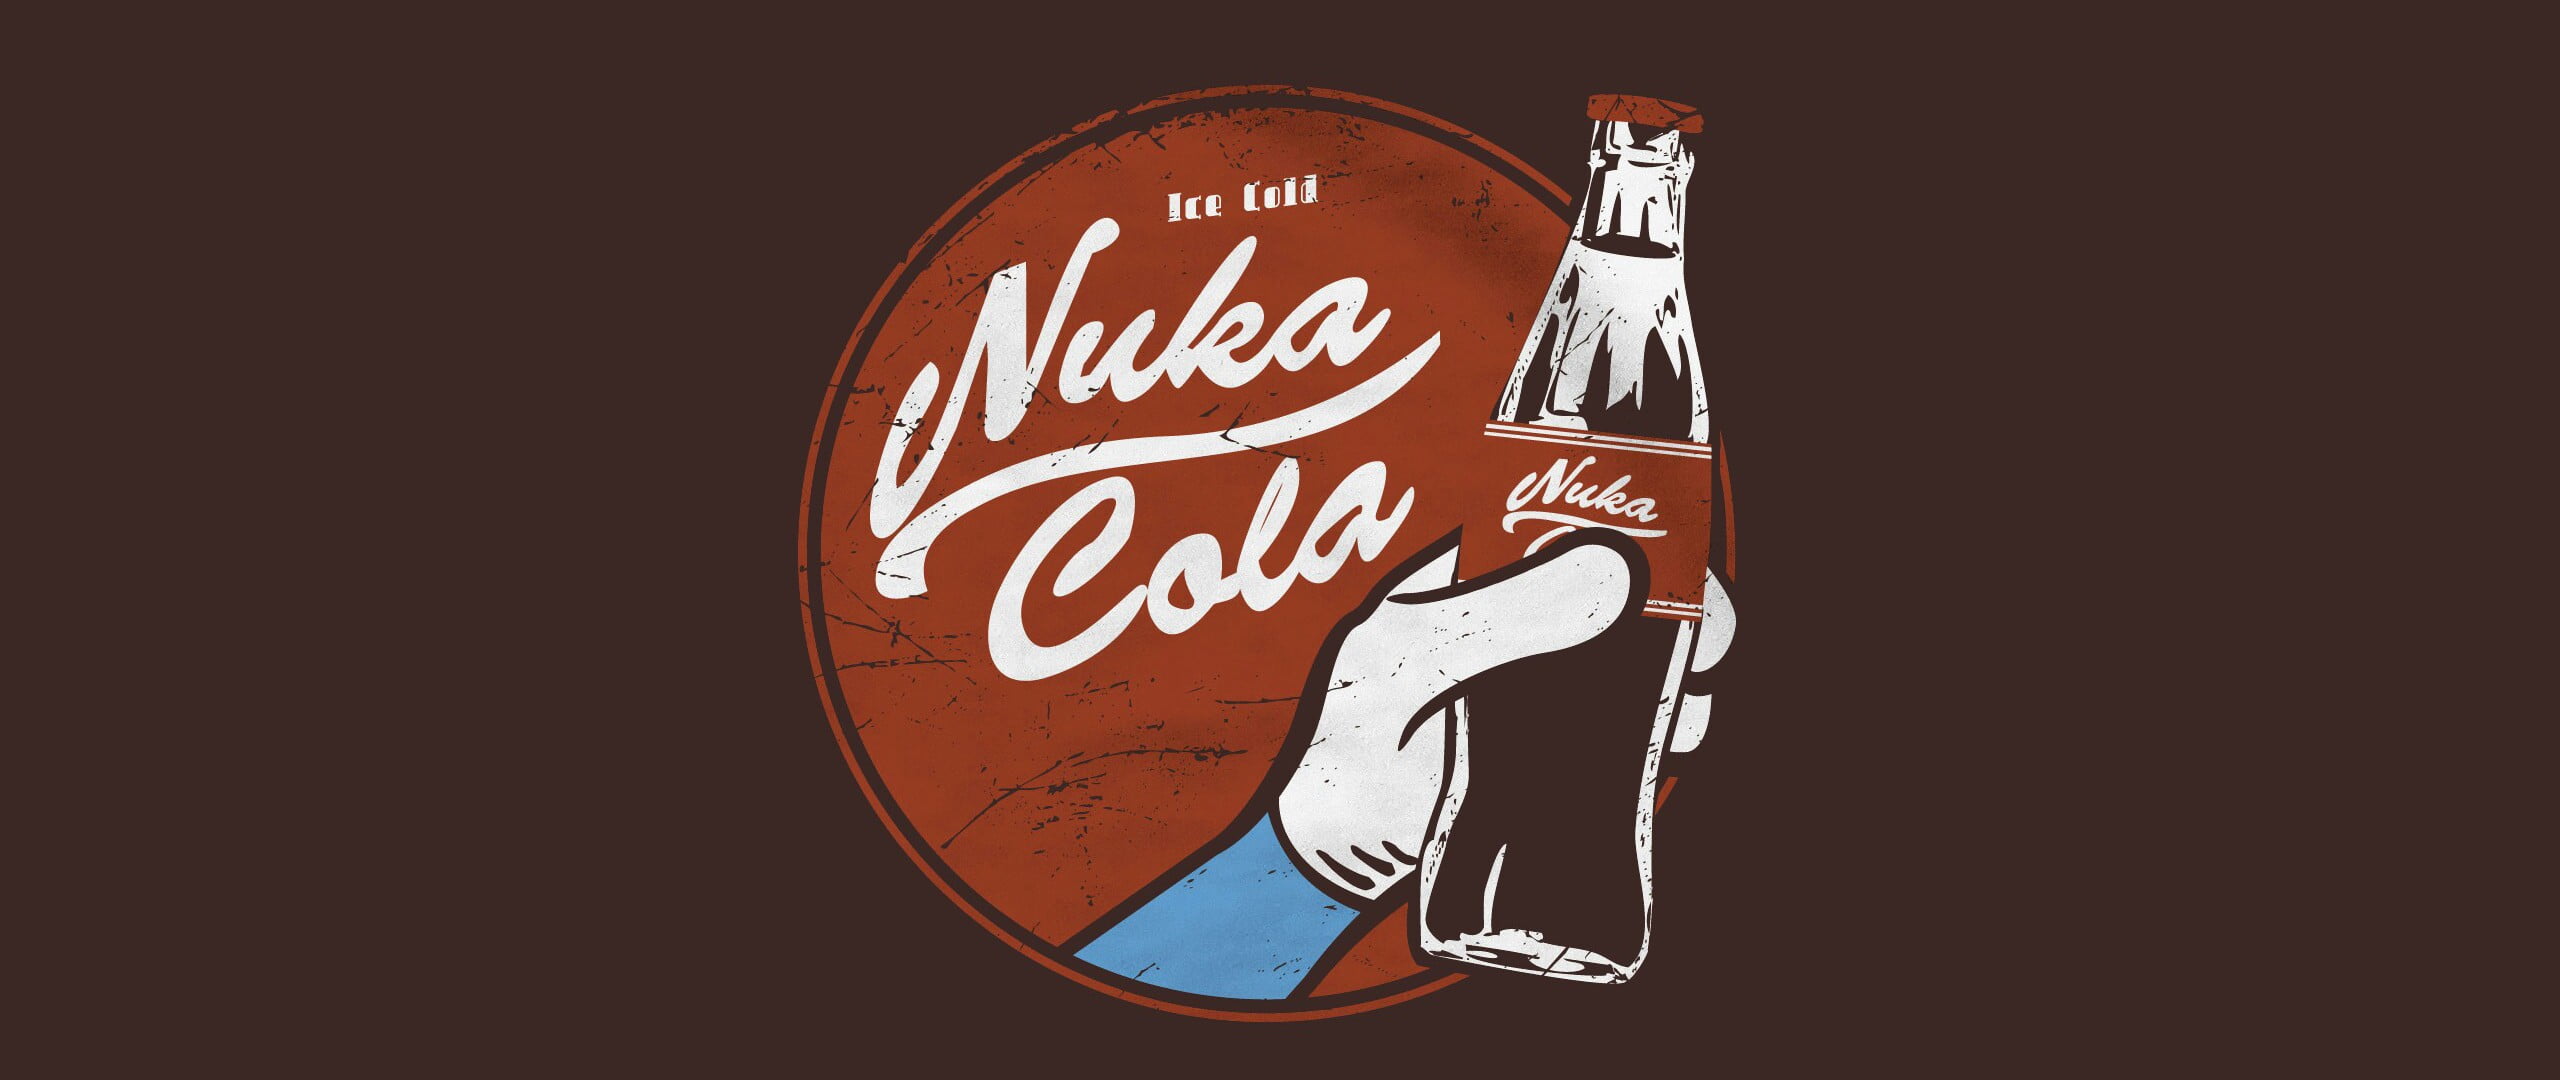 Nuka Cola illustration, Fallout 4, video games, text, no people